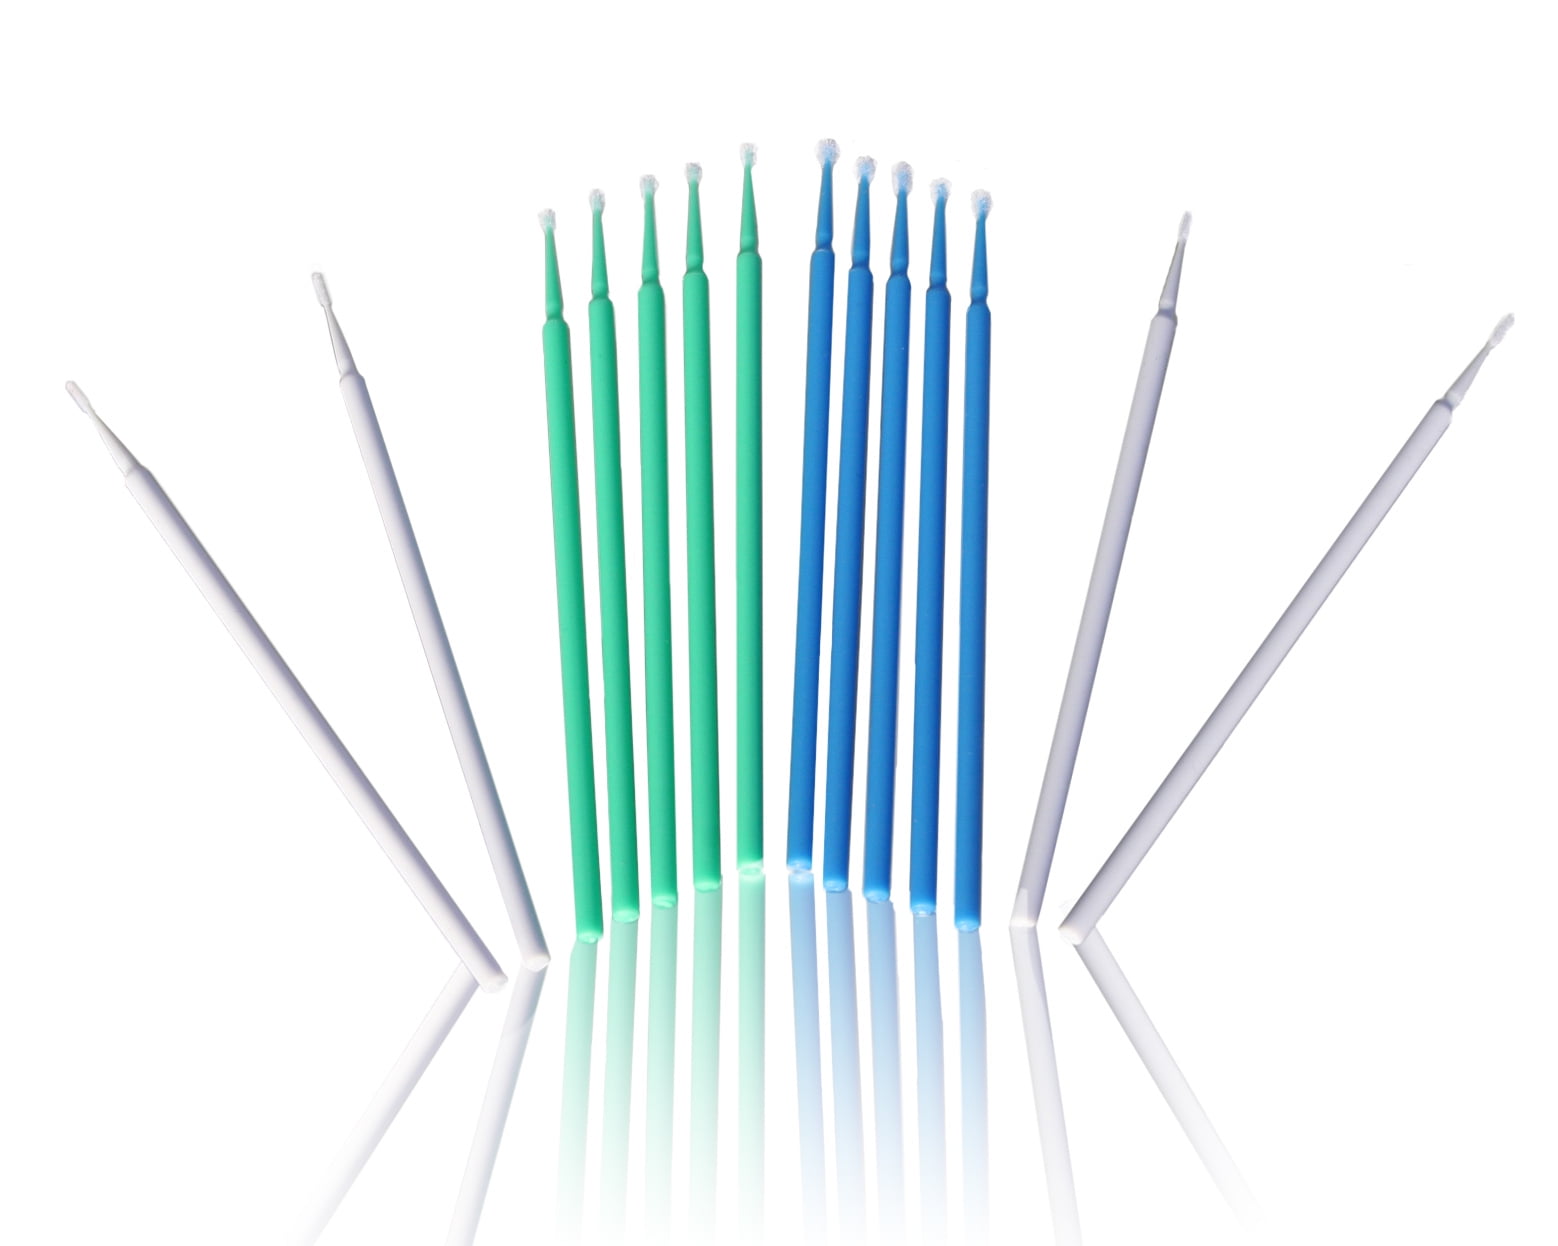 Cleaning Brushes - Micro-Tech Latam